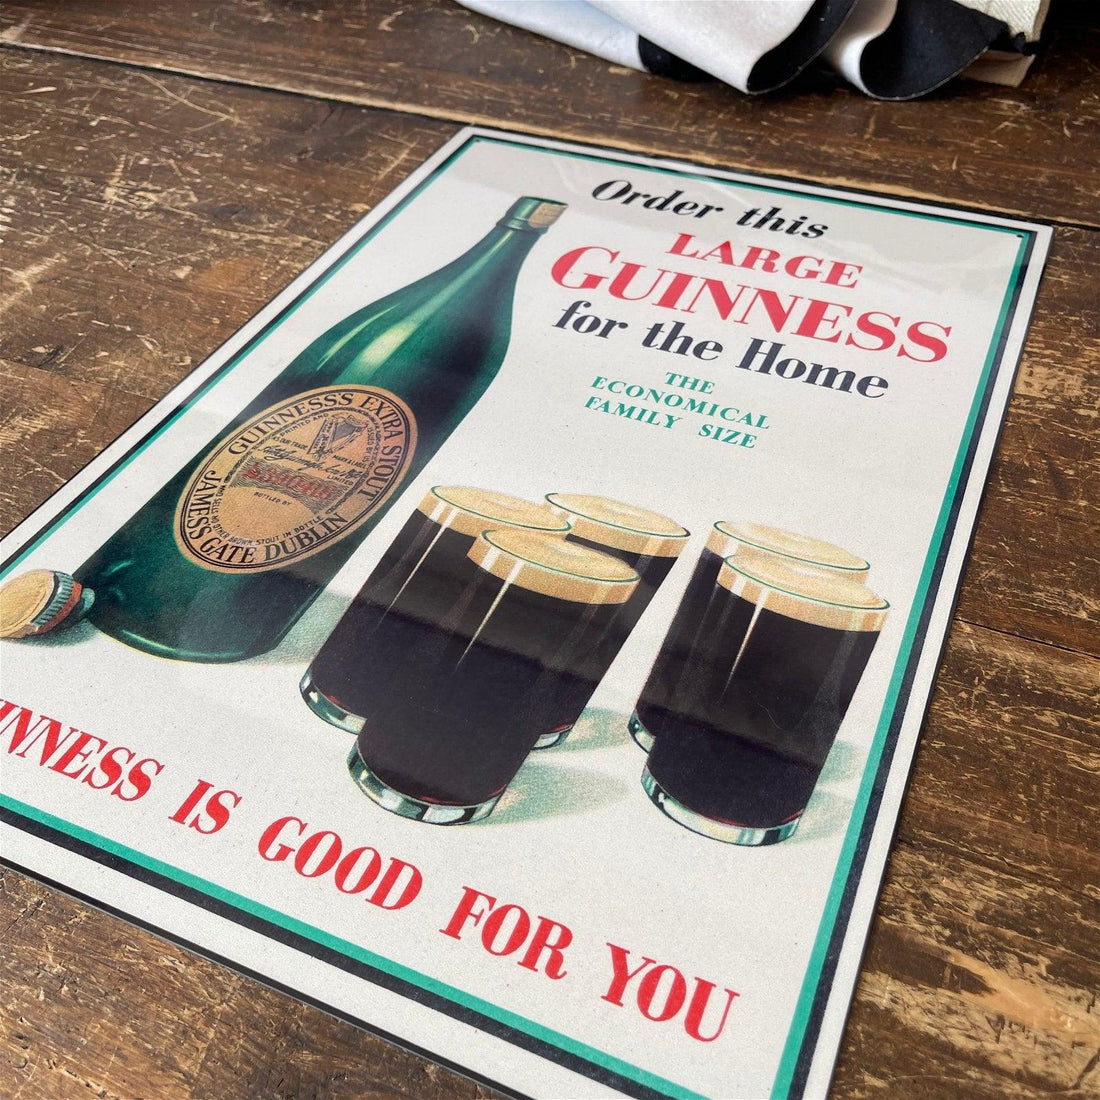 Vintage Metal Sign - Retro Advertising, Large Guinness For Home - £27.99 - Retro Advertising 